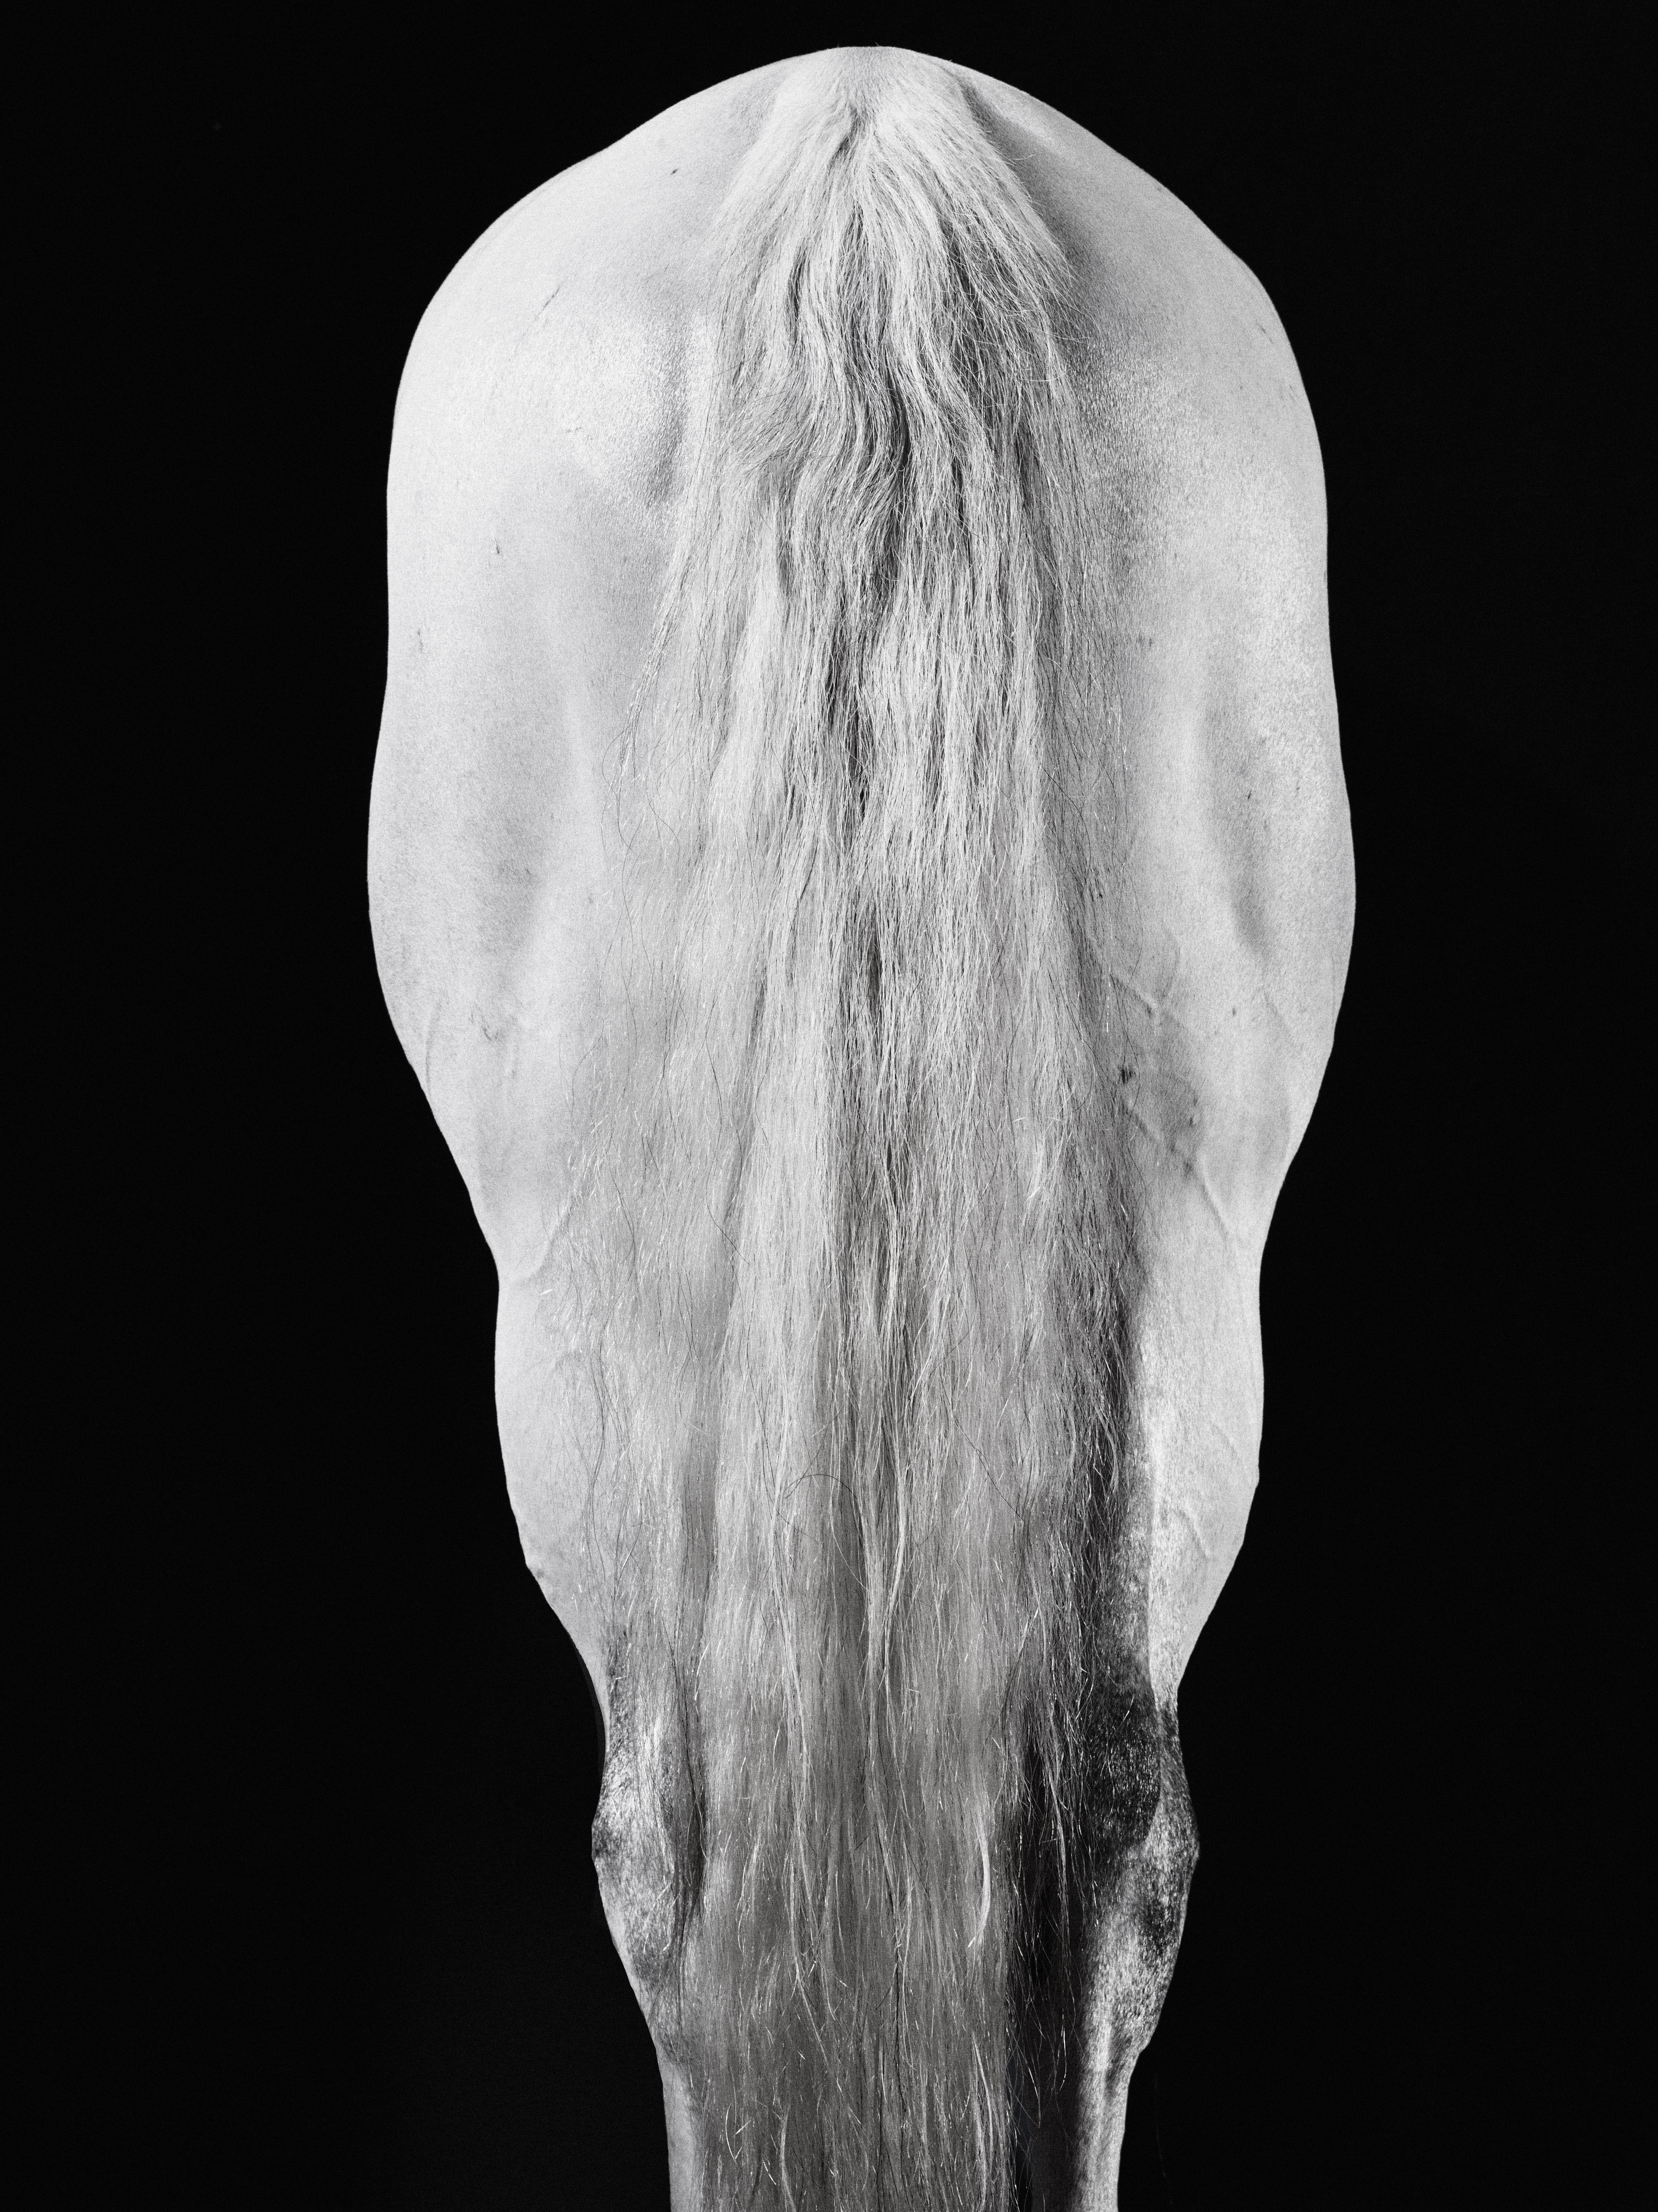 Carilot Tail - Limited Edition Black and White Horse Portrait 2015 - Photograph by Juan Lamarca